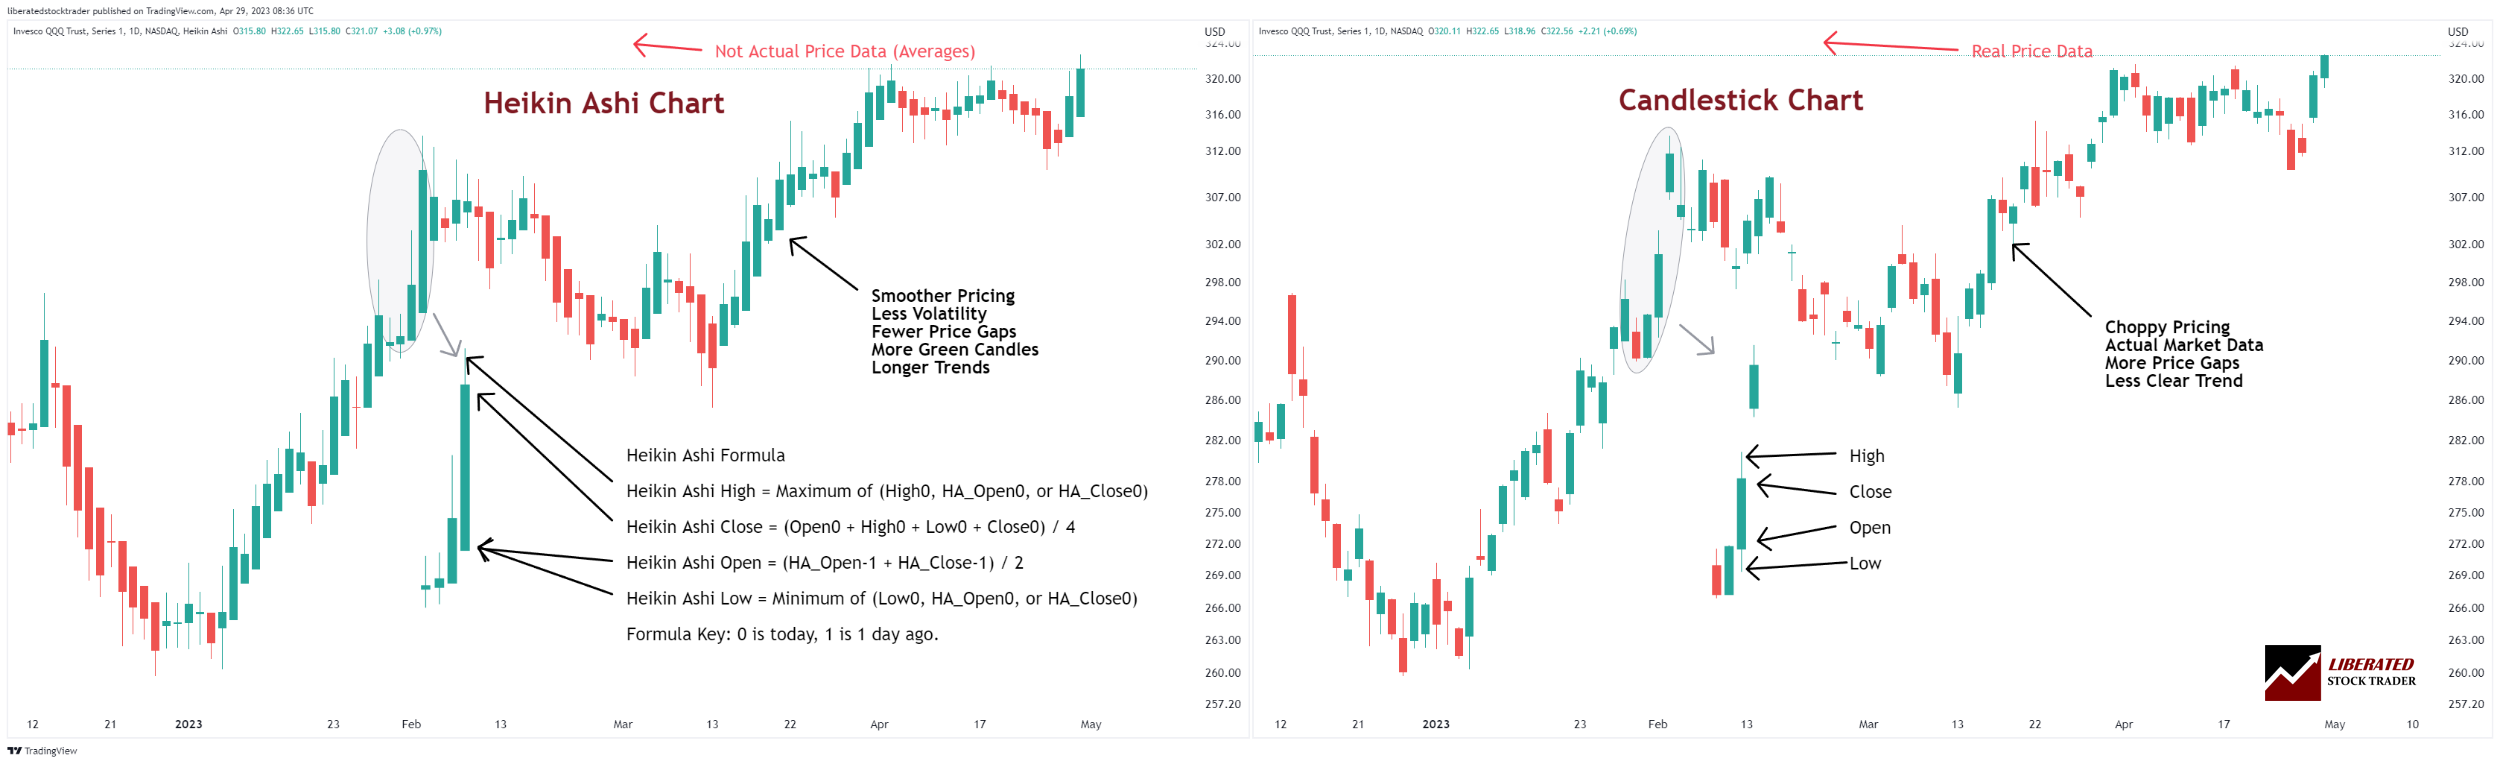 Heikin-Ashi vs. Traditional Candlestick Charts: The Key Differences